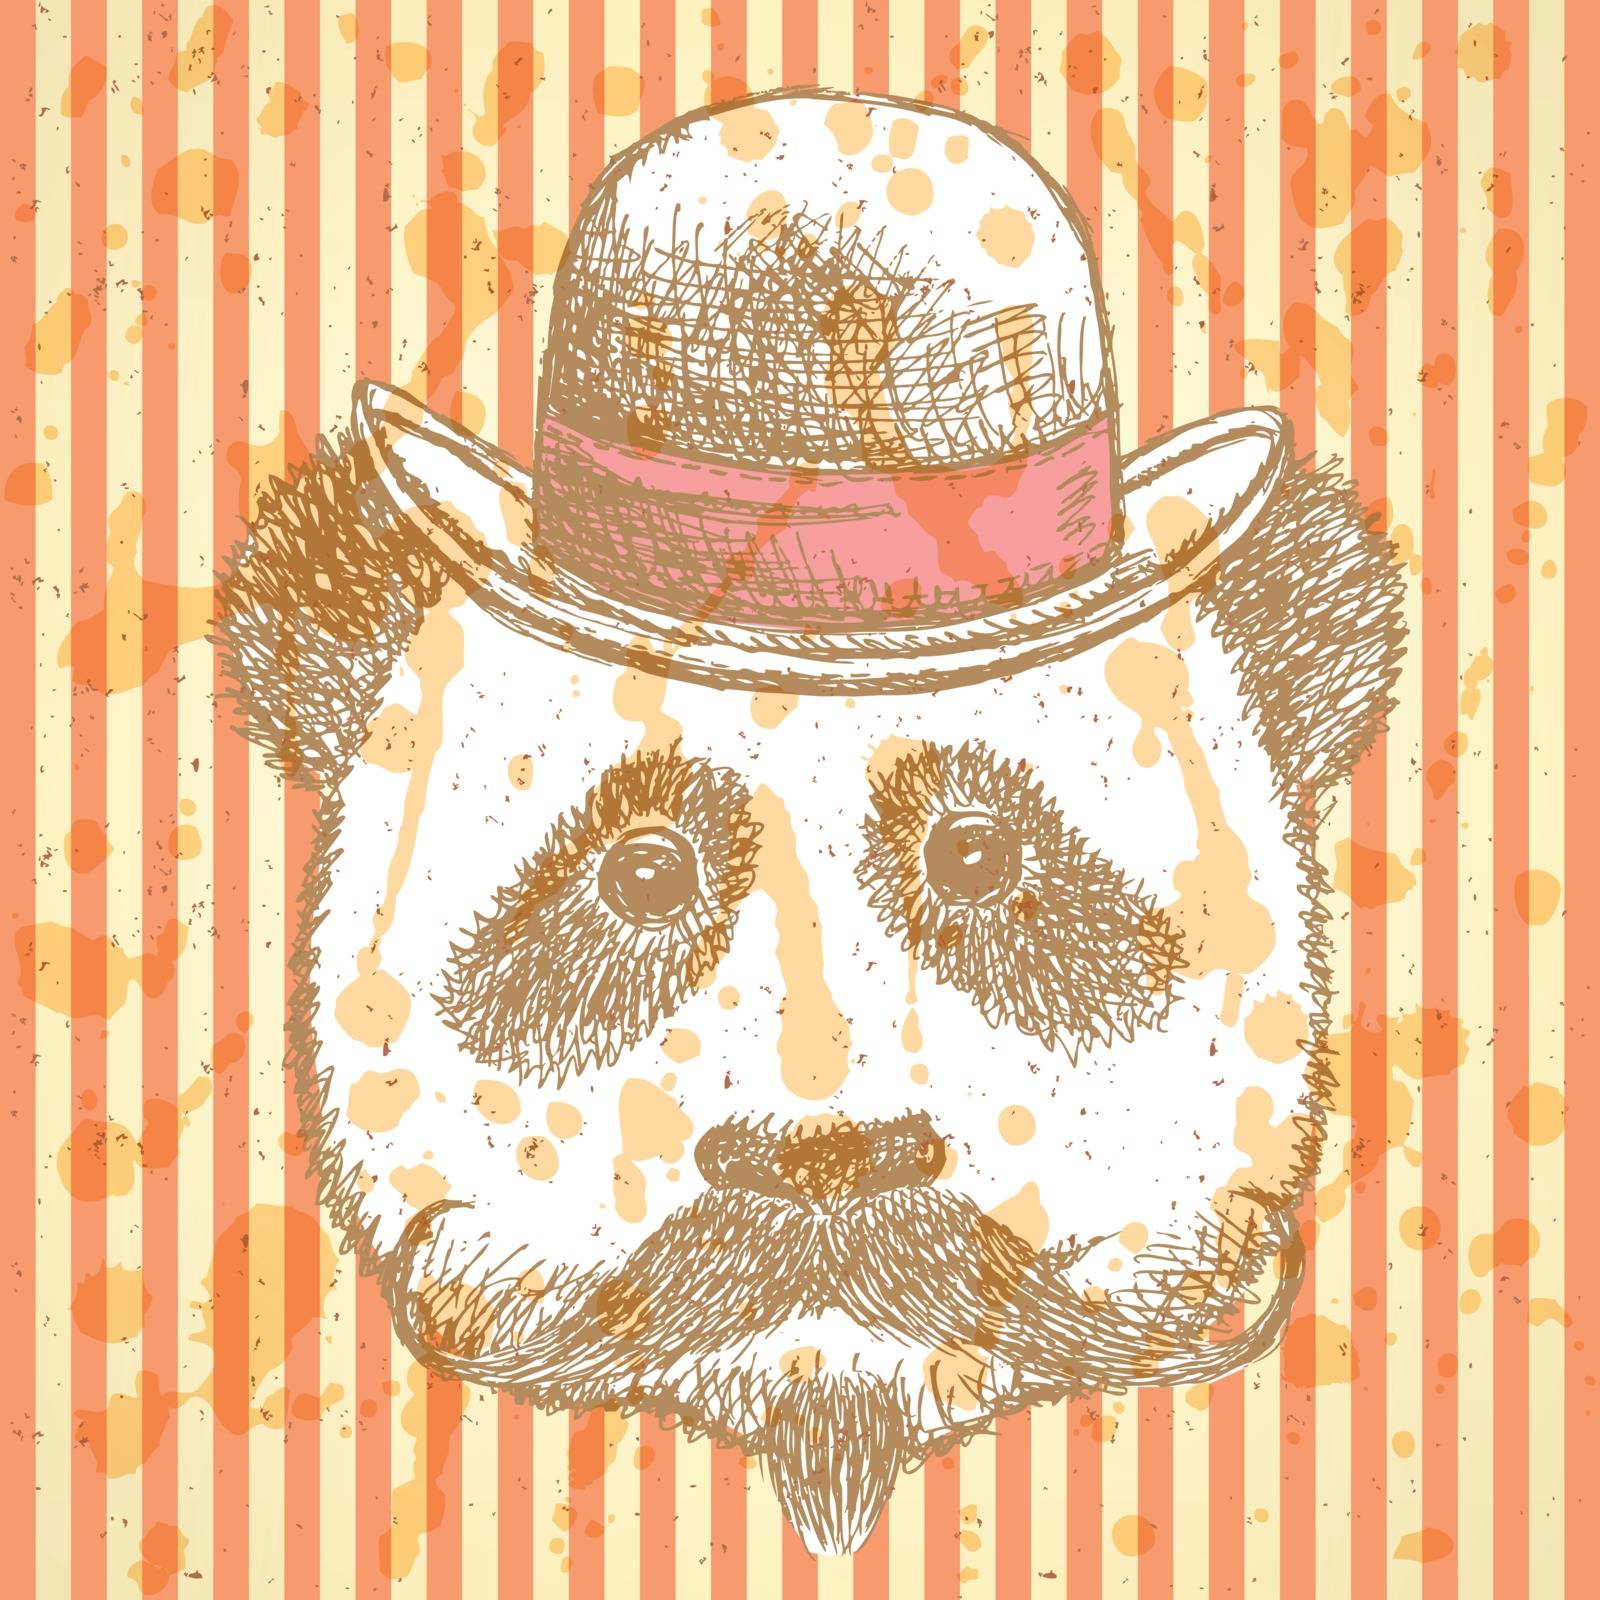 Sketch panda in hat with mustache, vector vintage background

